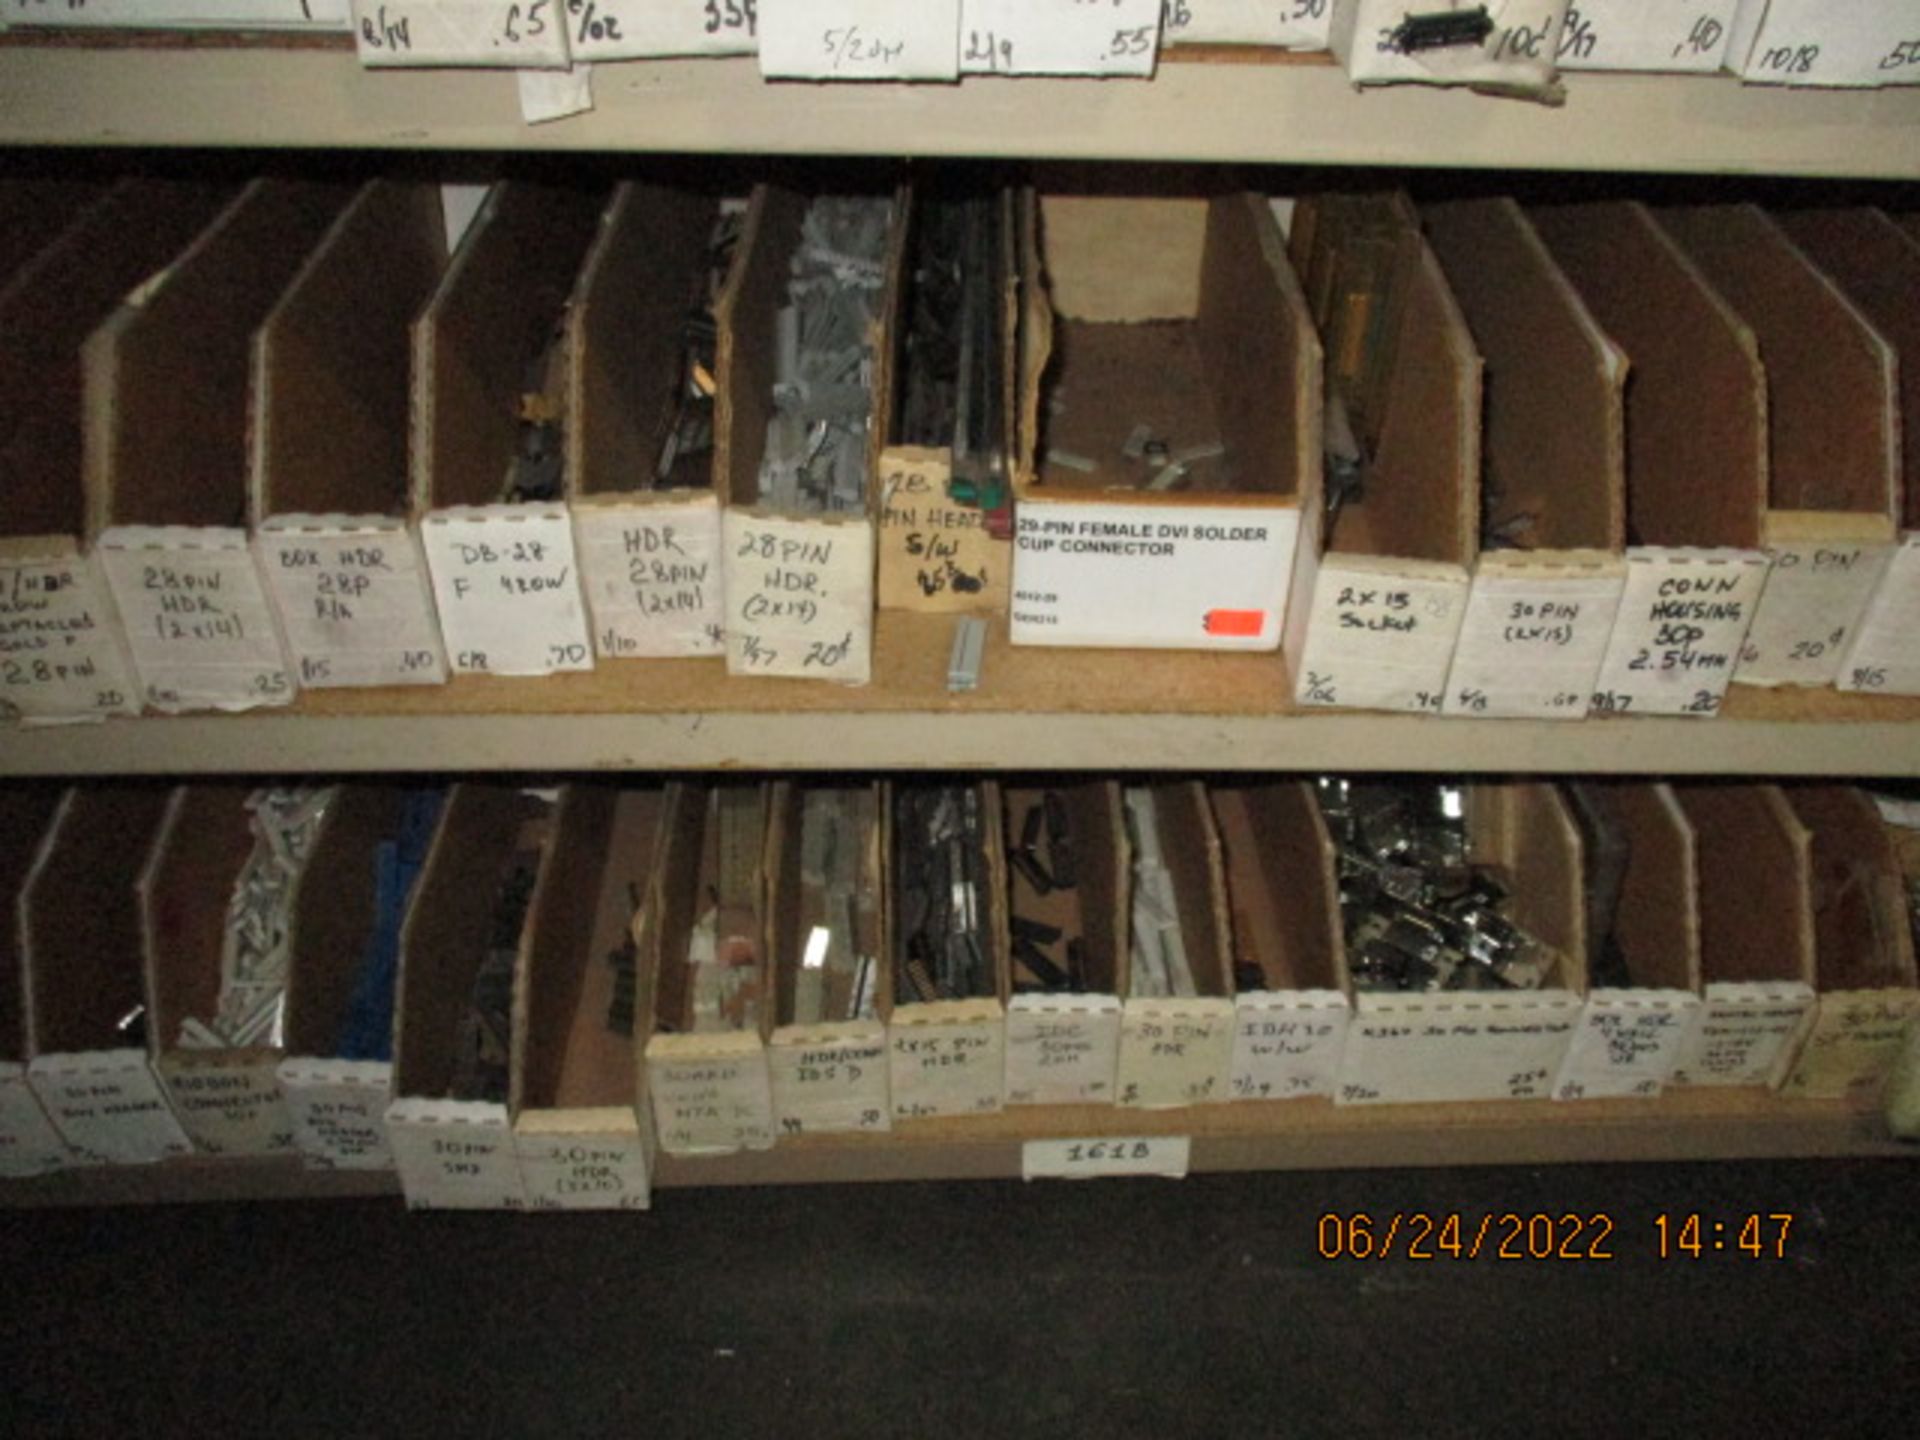 CONTENTS OF SHELVING UNIT CONSISTING OF 25, 26, 27, 28, & 30 PIN CONNECTORS - Image 6 of 6